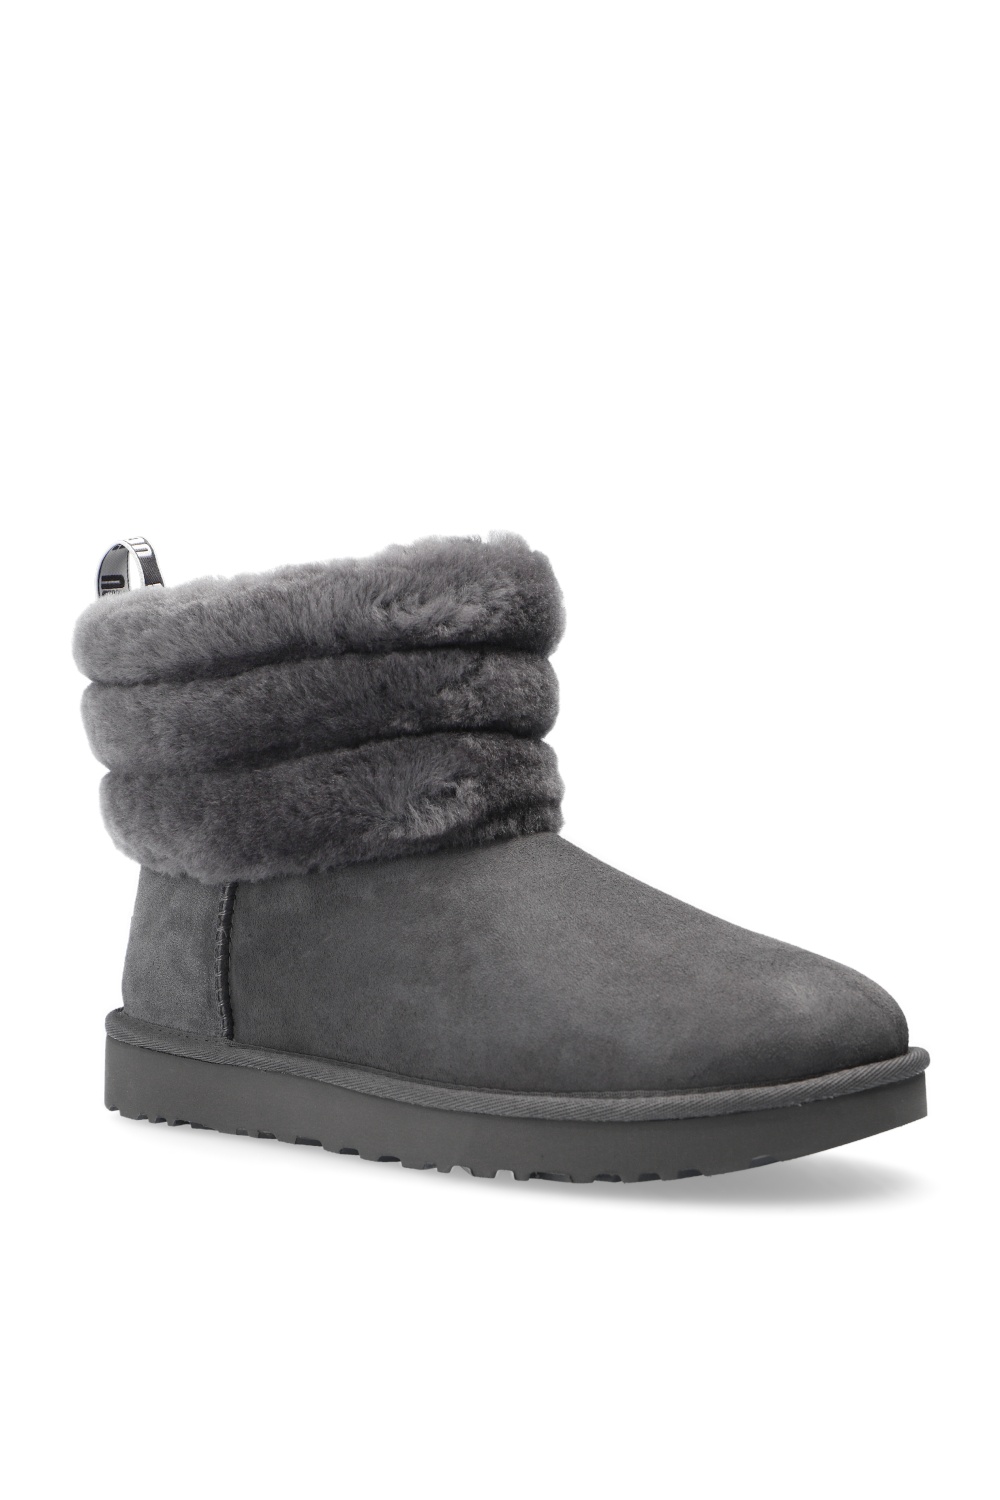 ugg Sandals ‘W Fluff Mini Quilted’ waterproof snow boots